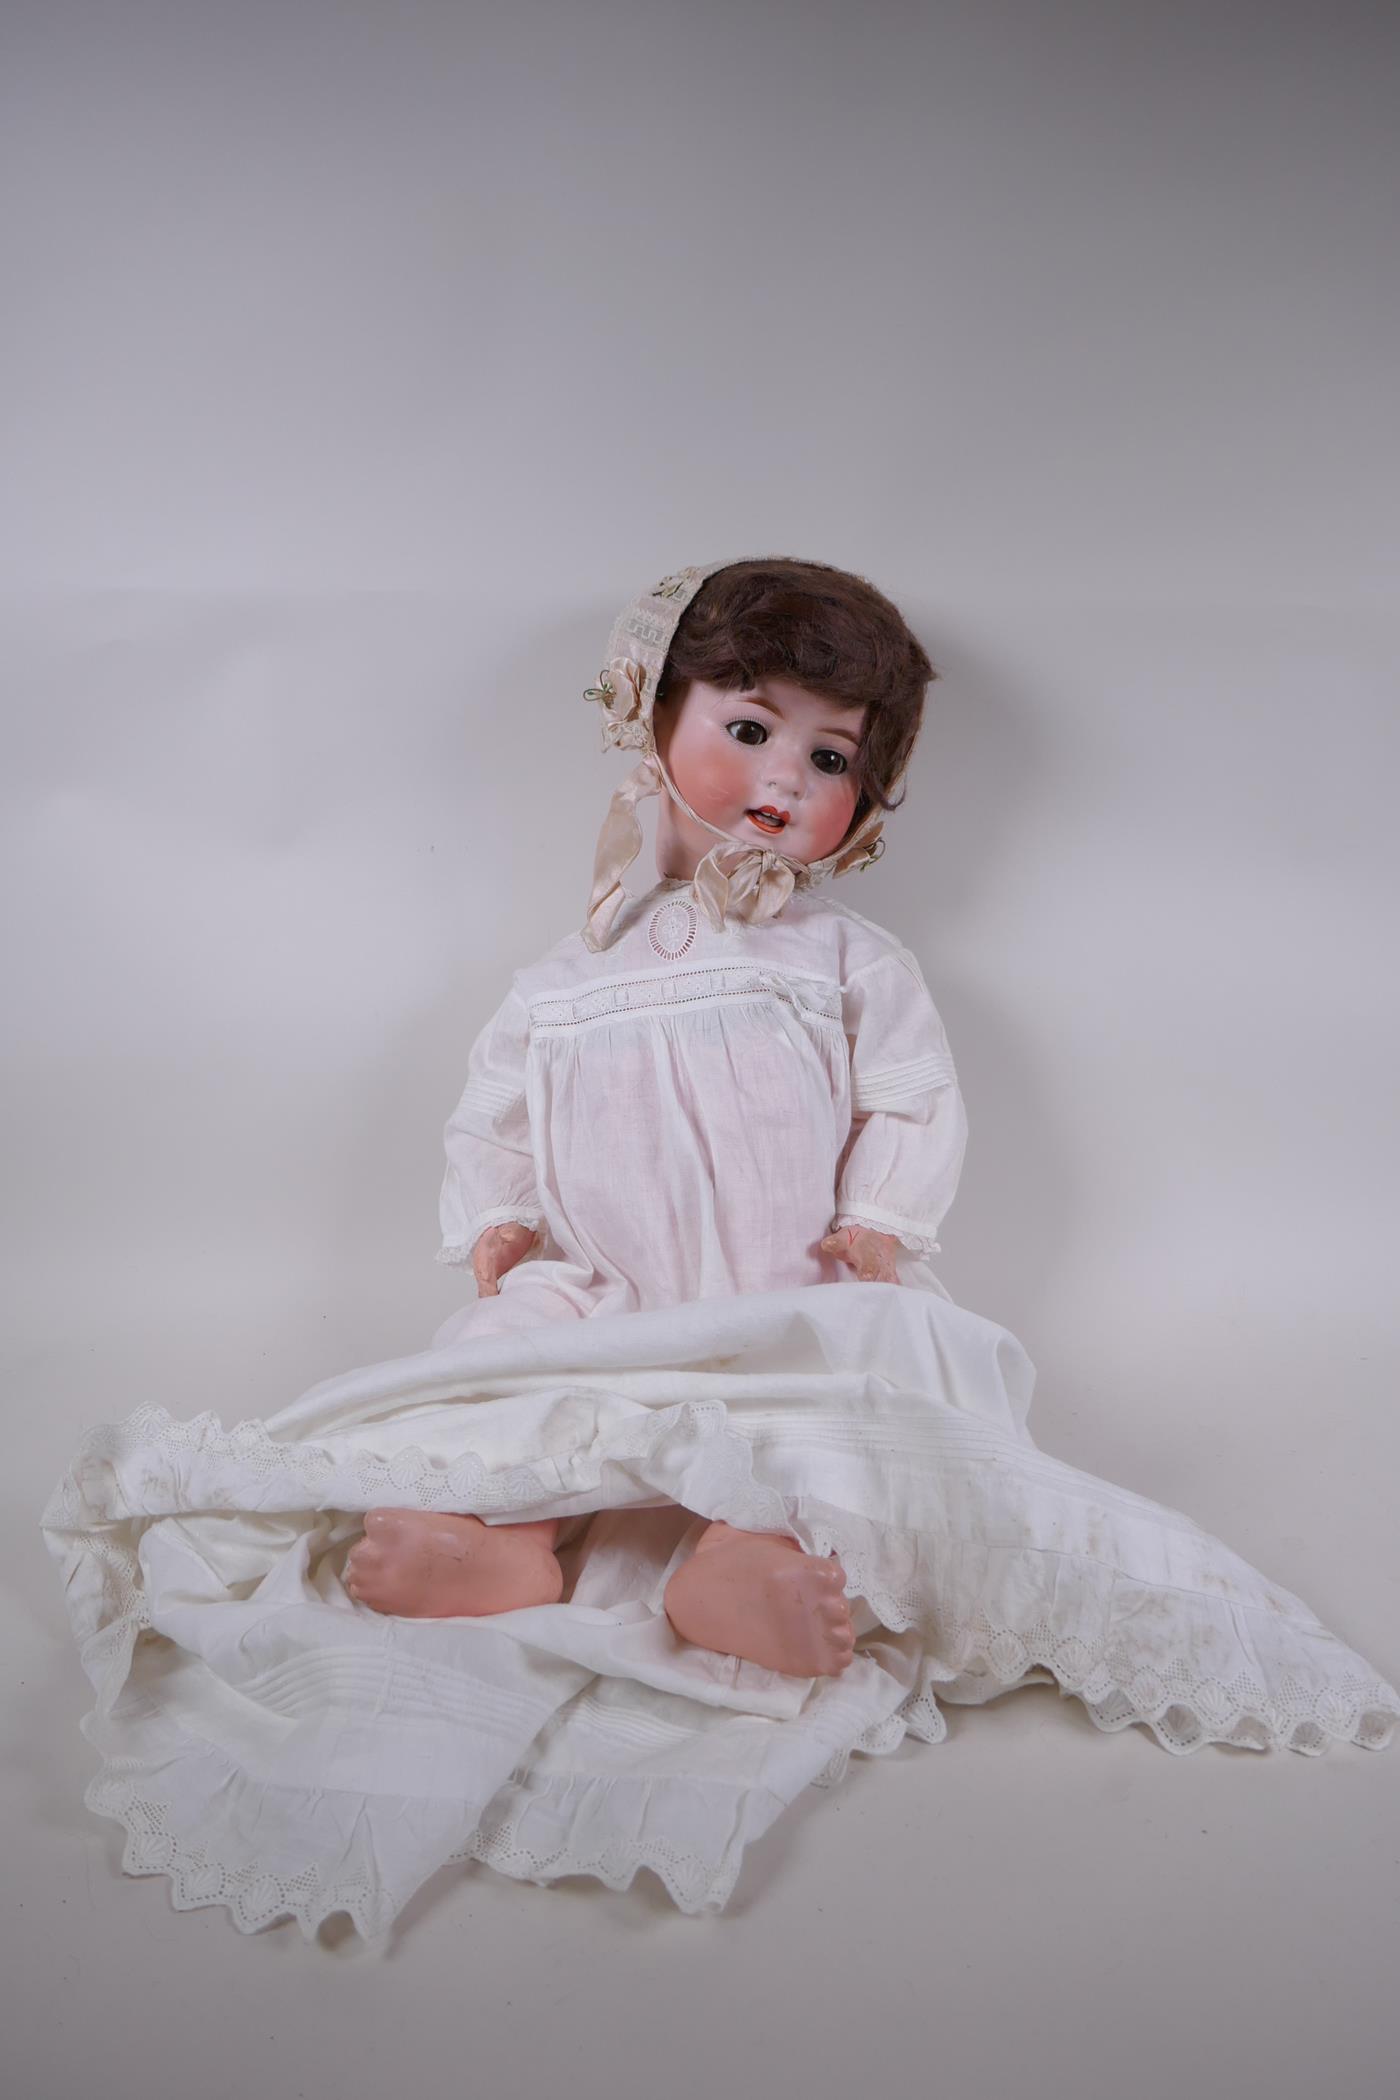 An antique German Heubach Koppelsdorf bisque headed toddler doll with brown sleeping eyes, moving